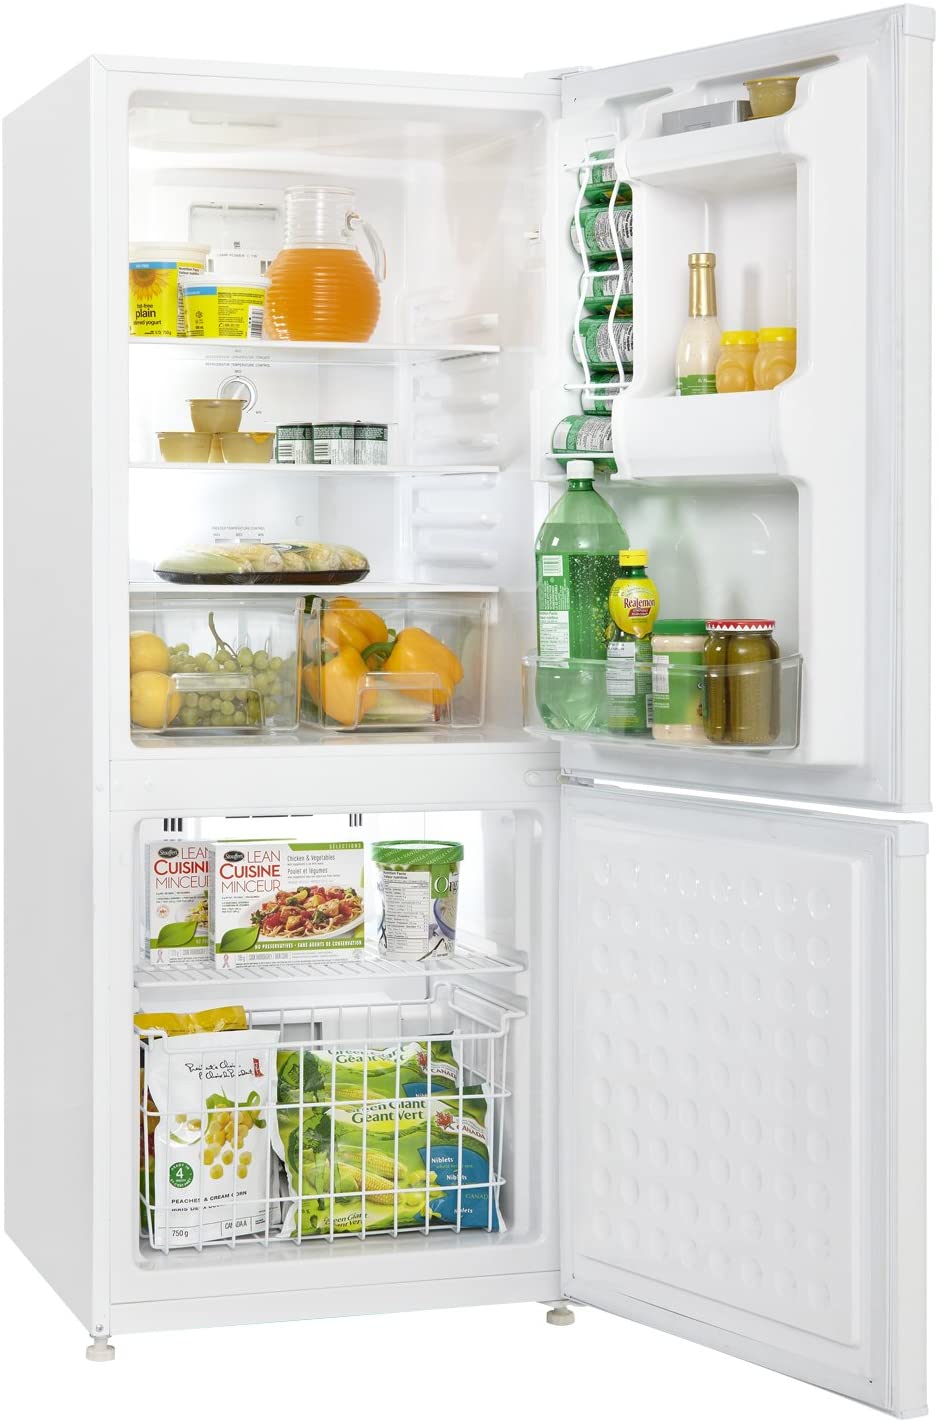 71Kaa9g77rL. AC SL1500 10 BEST APARTMENT/NARROW REFRIGERATOR IN 2021 REVIEW ON AMAZON